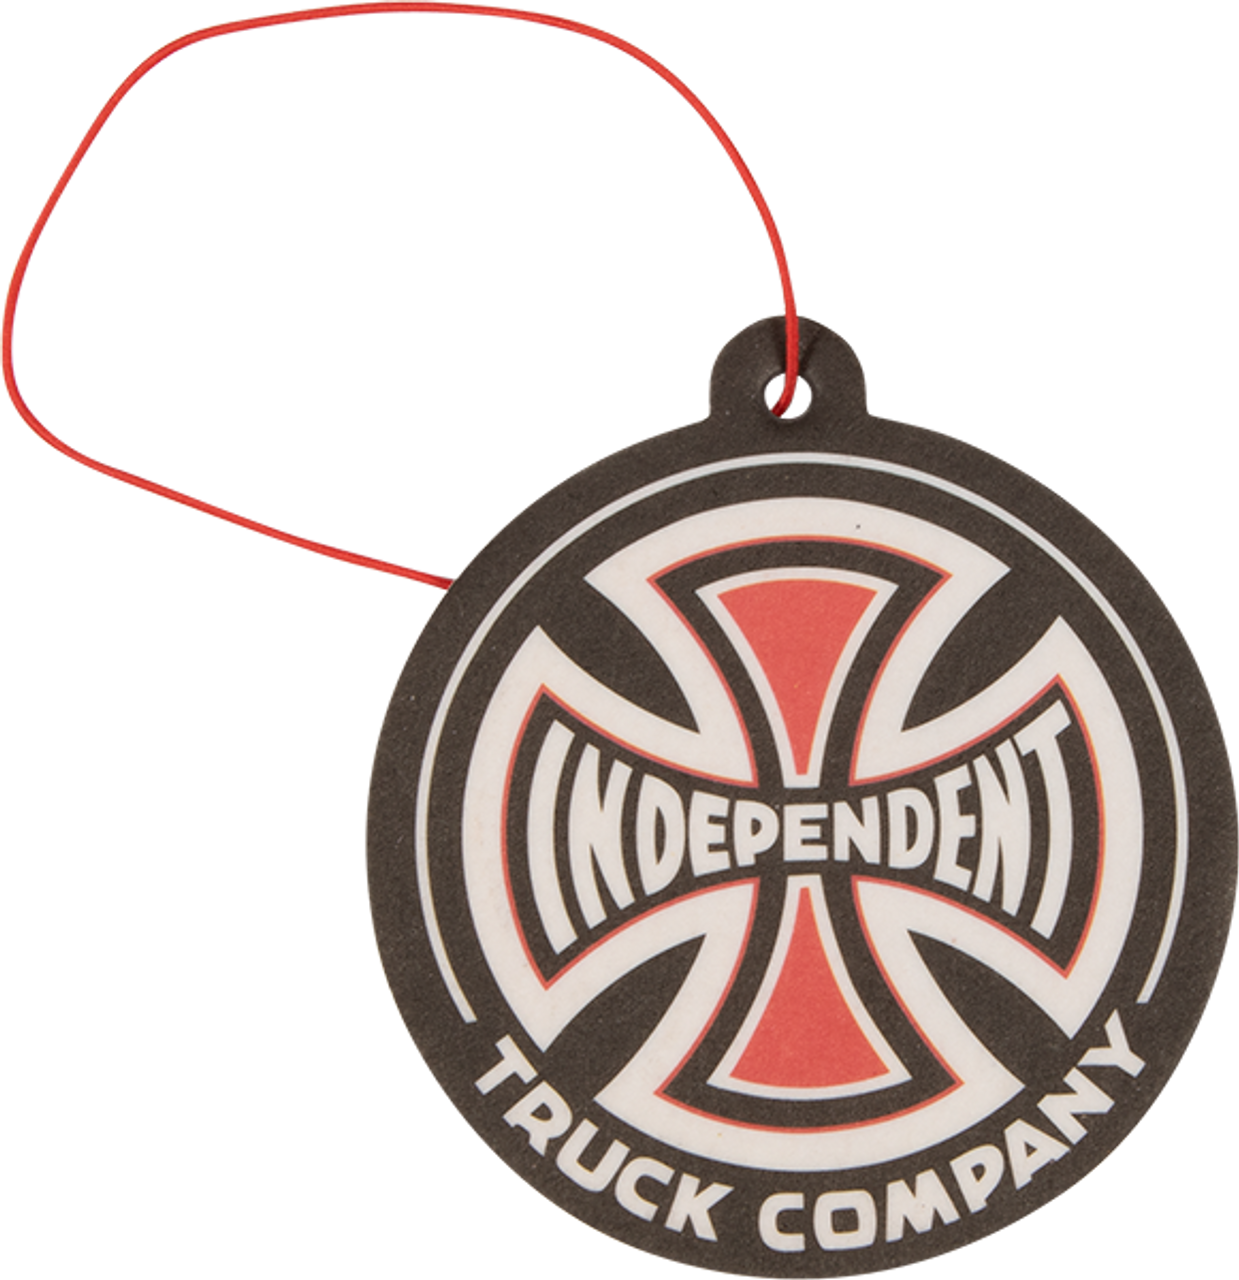 INDEPENDENT TRUCK CO AIR FRESHENER